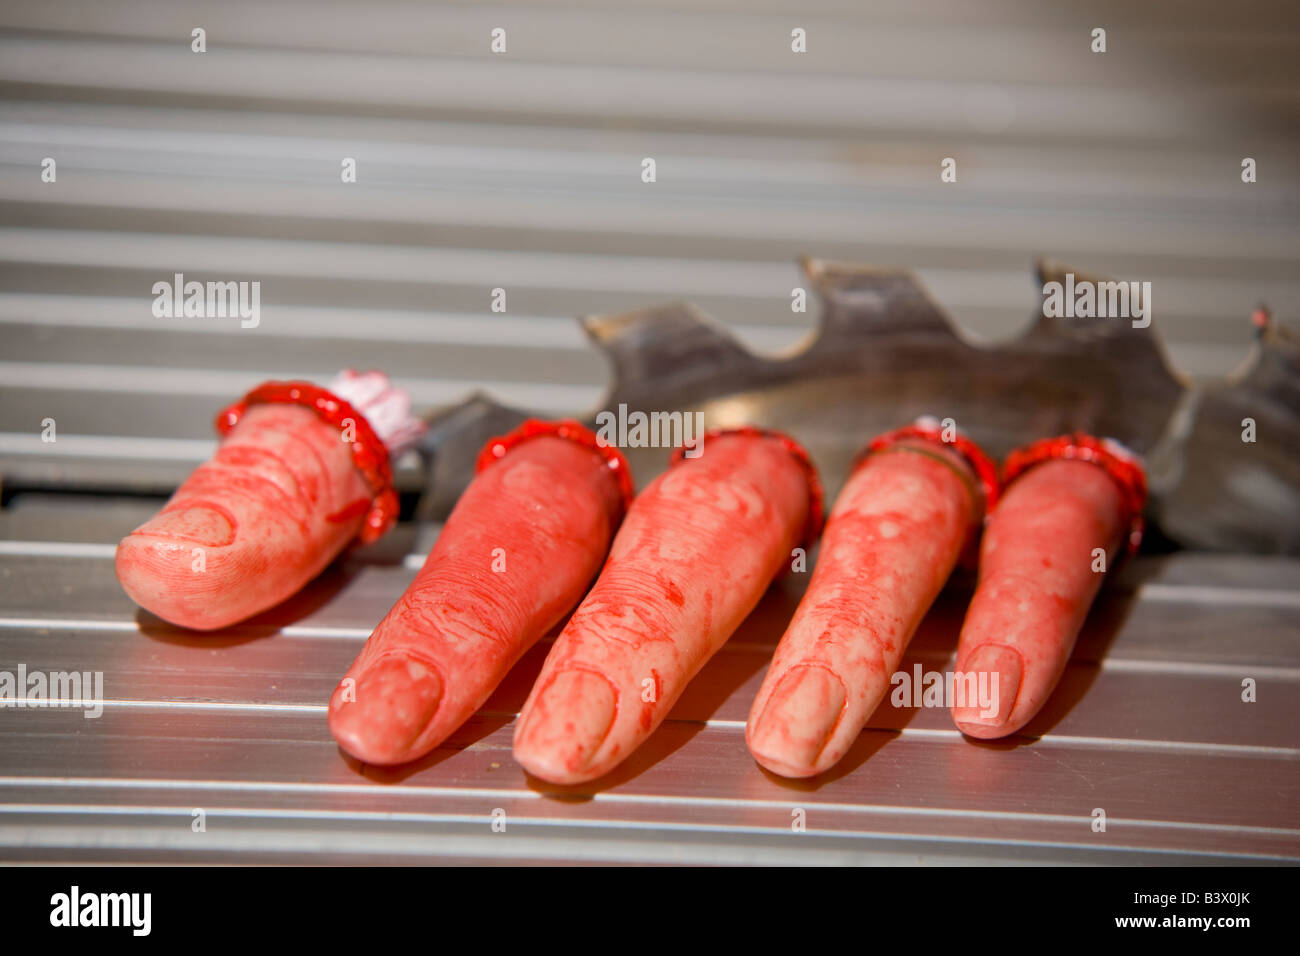 Imitation fake Severed fingers after circular saw accident Stock Photo